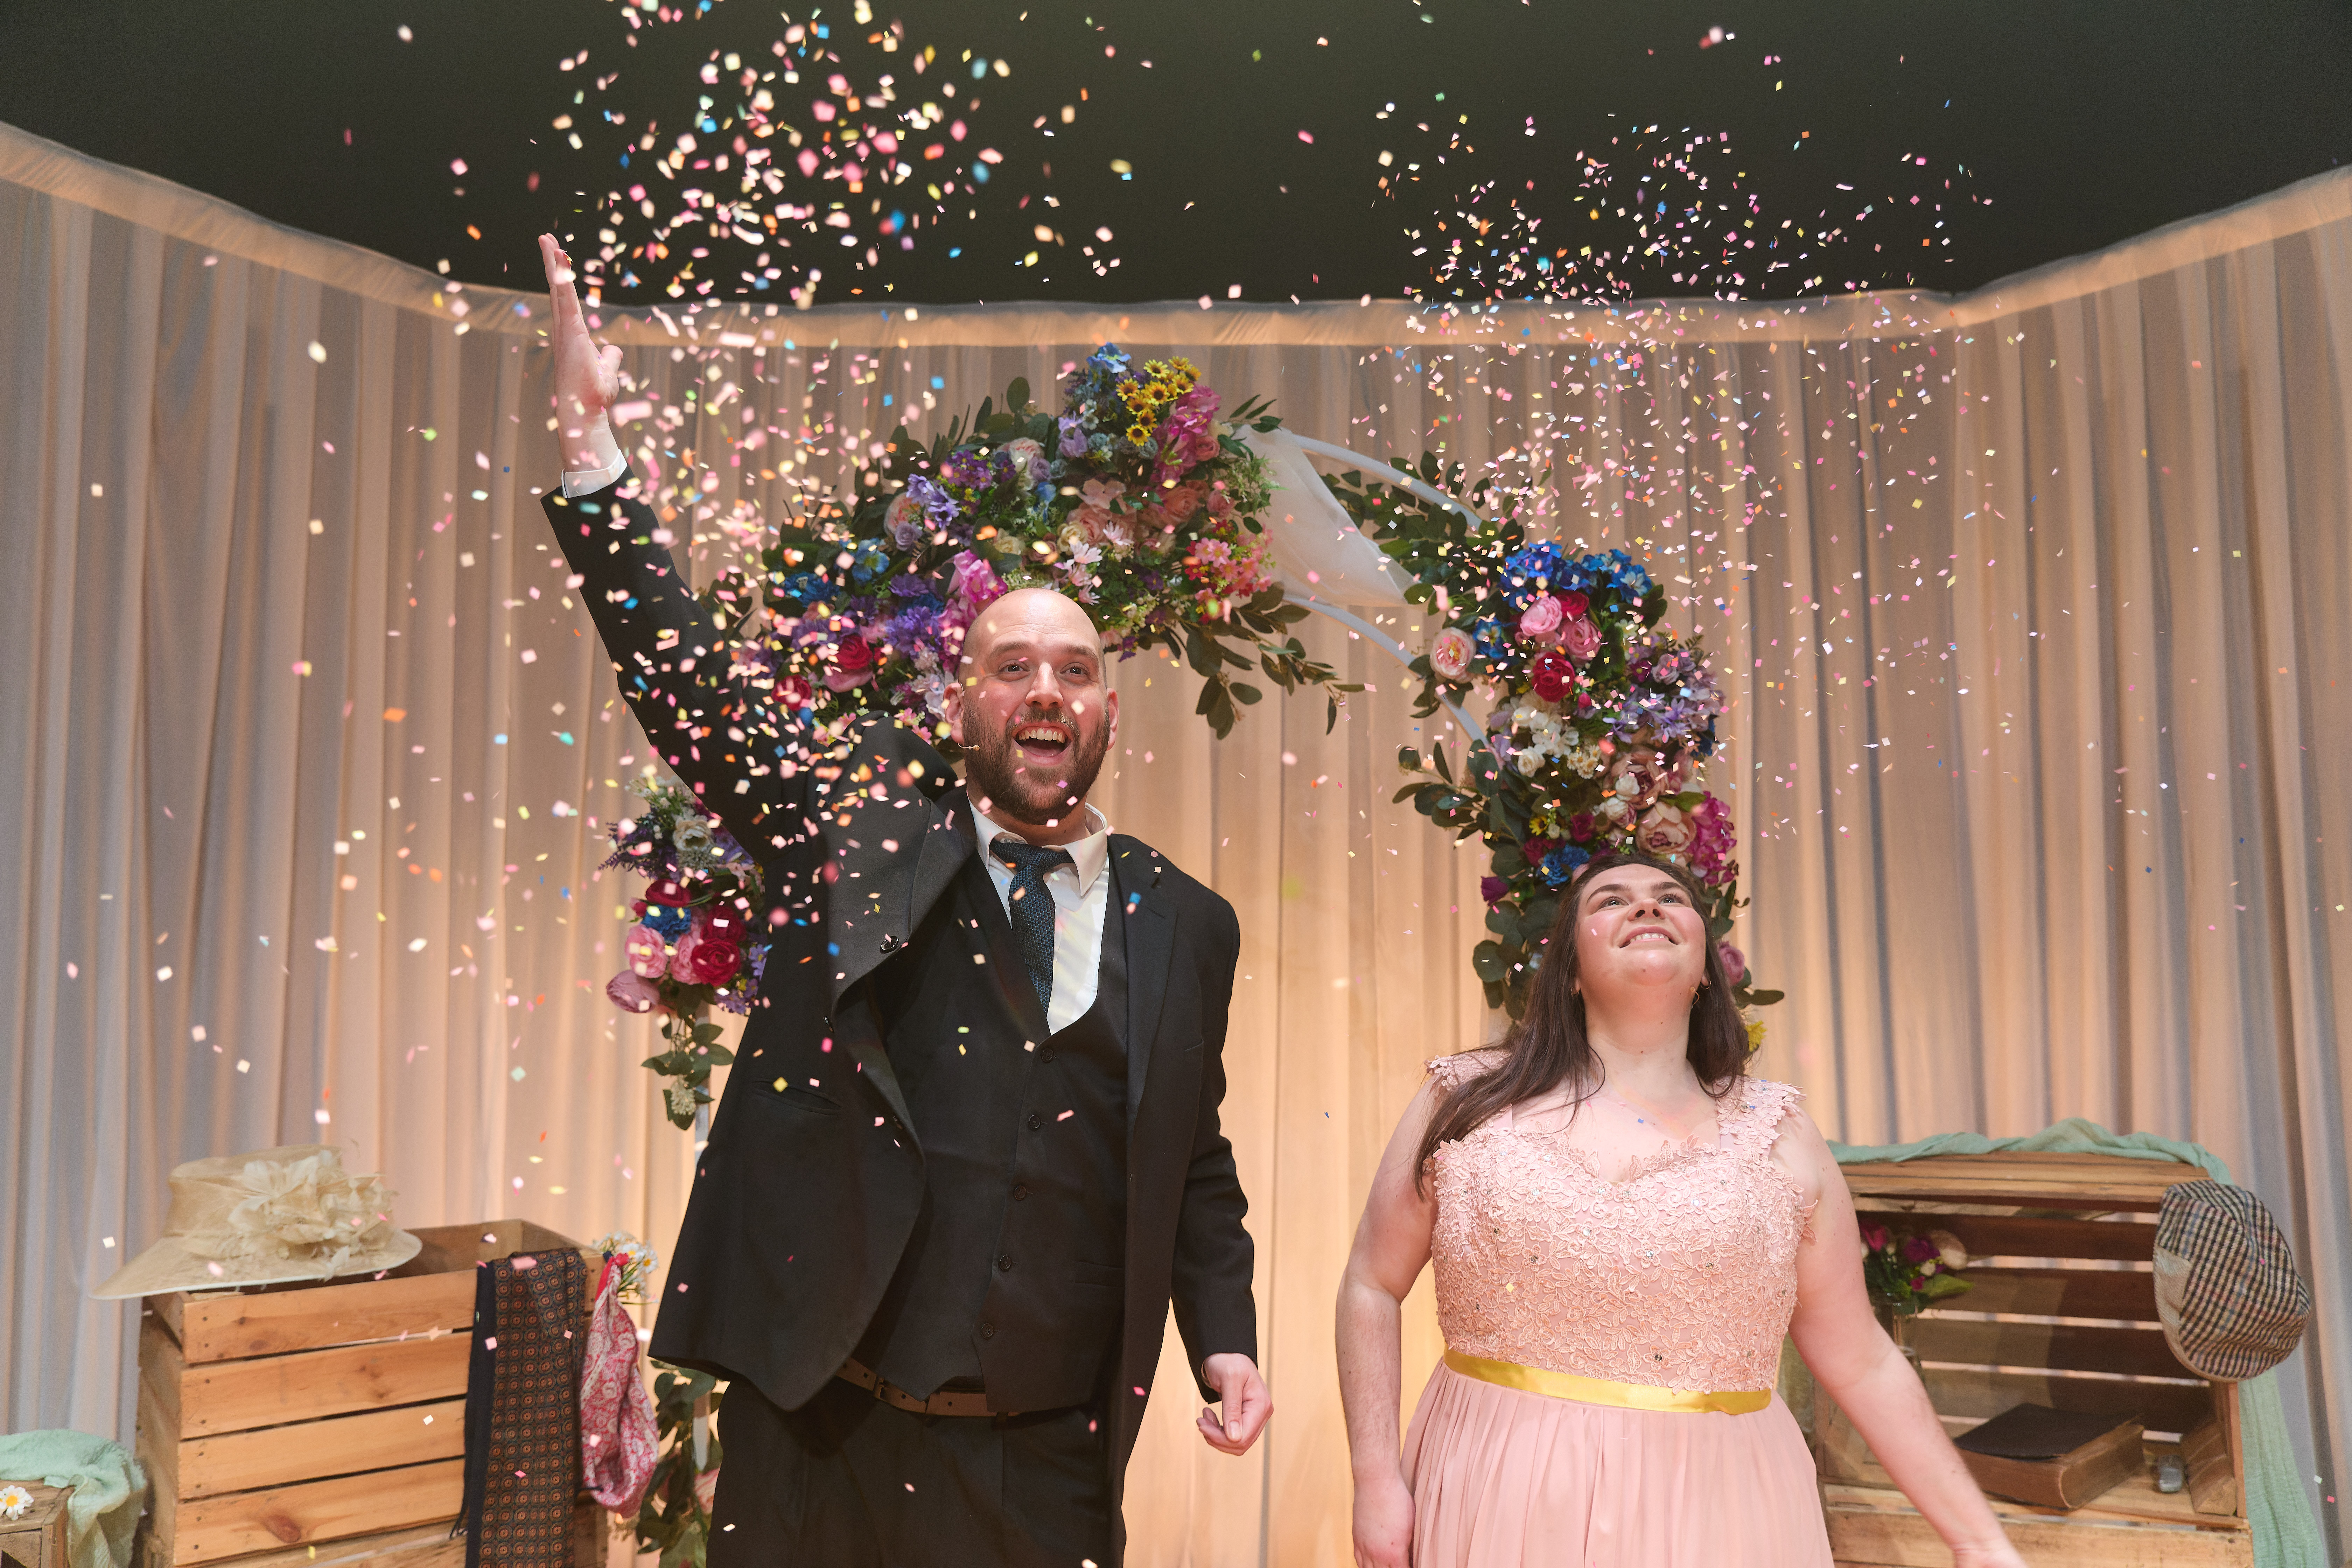 Mared Llywelyn and Mark Henry Davies in Parti Priodas. Mared is a young white woman with brown hair. She wears a pink bridesmaid dress. Mark is a young white, bald man wearing a black suit and tie. The set consists of a white drape background, and stacked crates topped with wedding paraphernalia with objects and there is an archway decorated with flowers. Mark is throwing confetti. He smiles and looking at the confetti. Mared is looking up at the confetti with eyes wide, smiling.